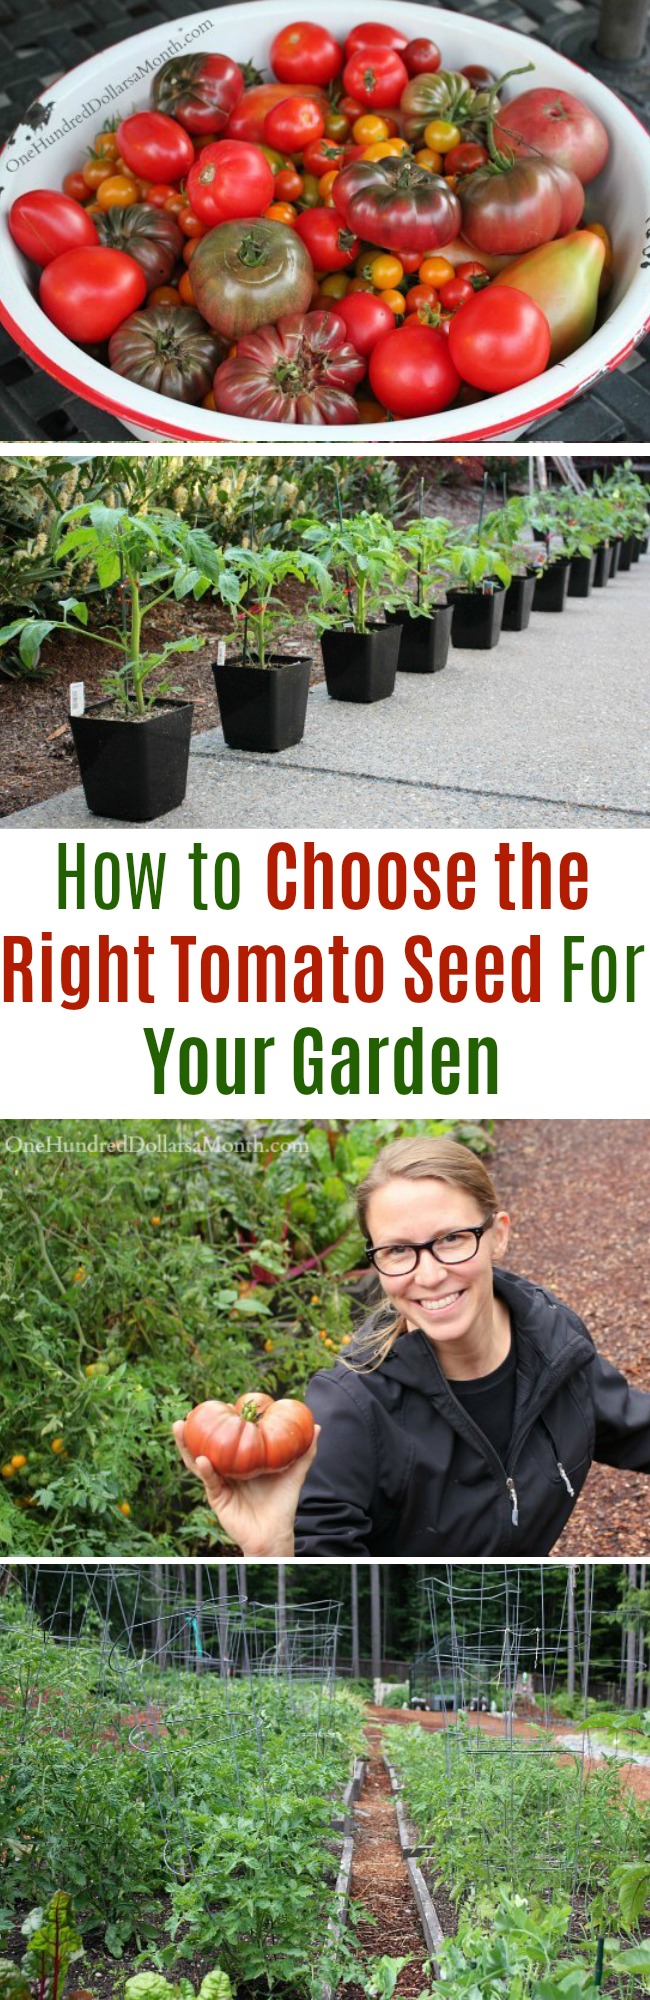 How to Choose the Right Tomato Seed For Your Garden